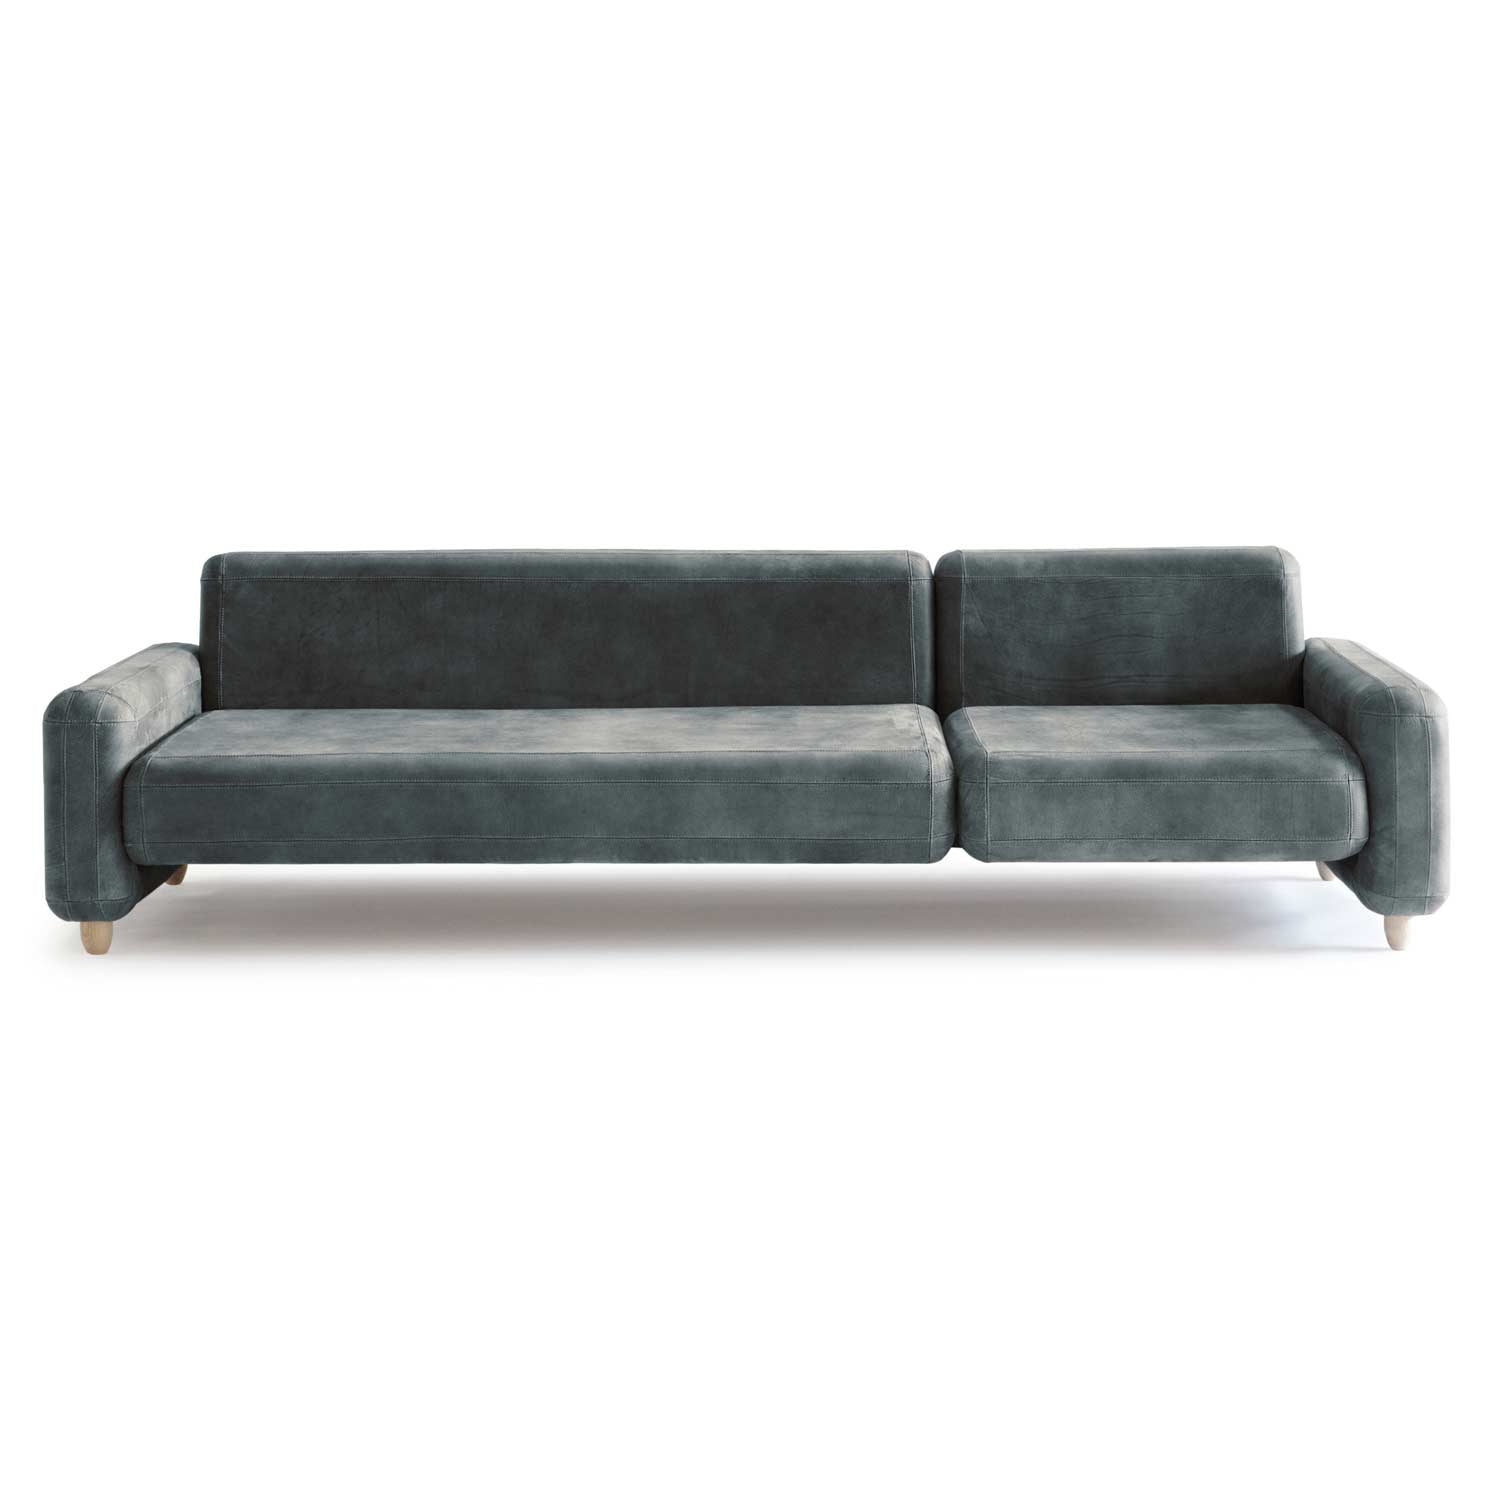 Comfortable Seating with Traco Series - grey leather sofa front view